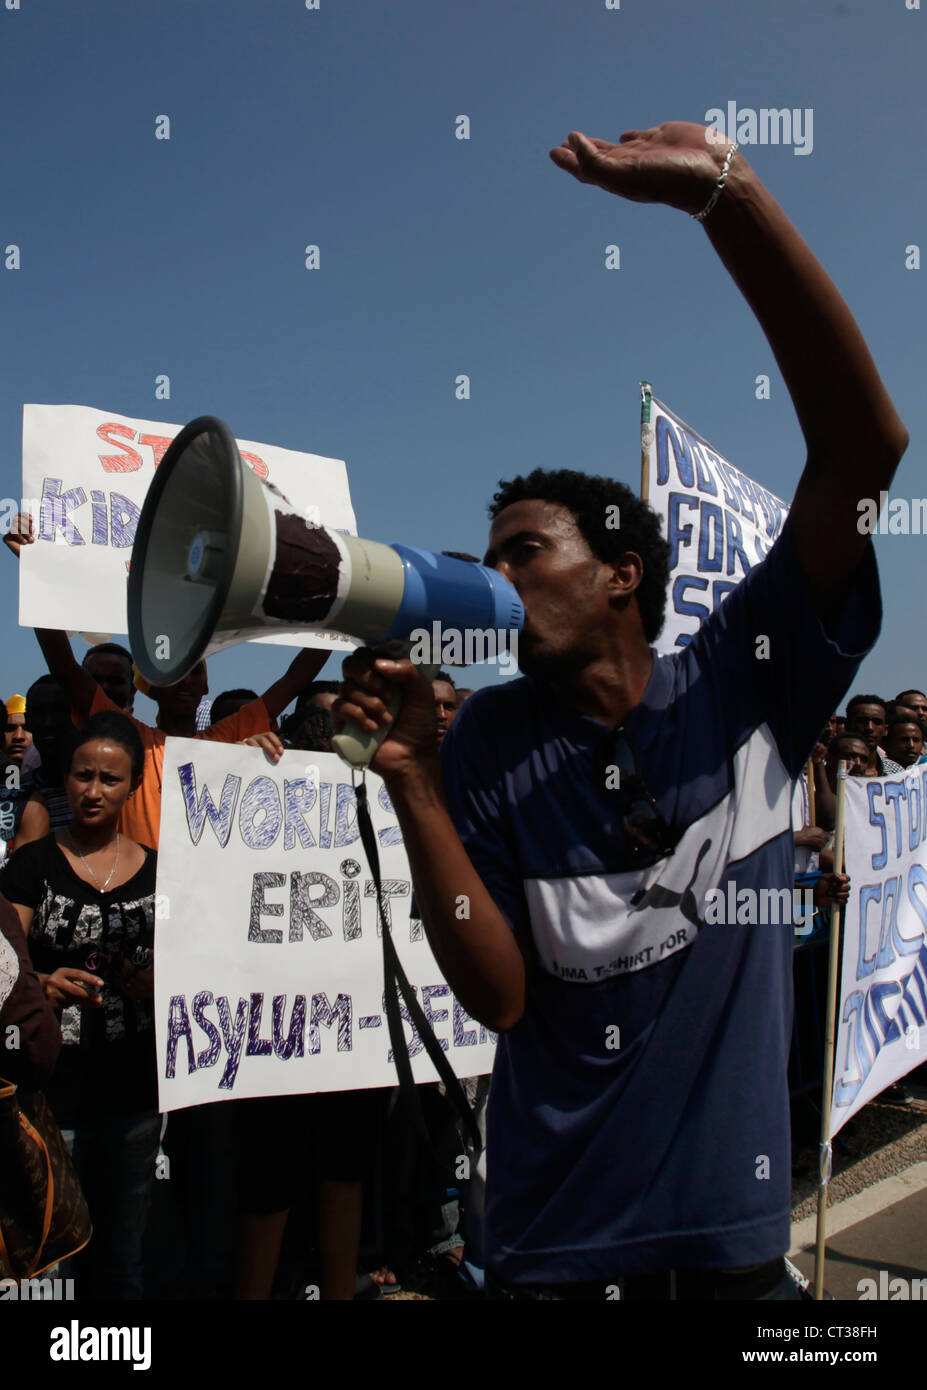 African migrants taking part in a demonstration against the deportation policy of asylum seekers and illegal immigration by Israeli government in front of the US embassy in Tel Aviv Israel Stock Photo